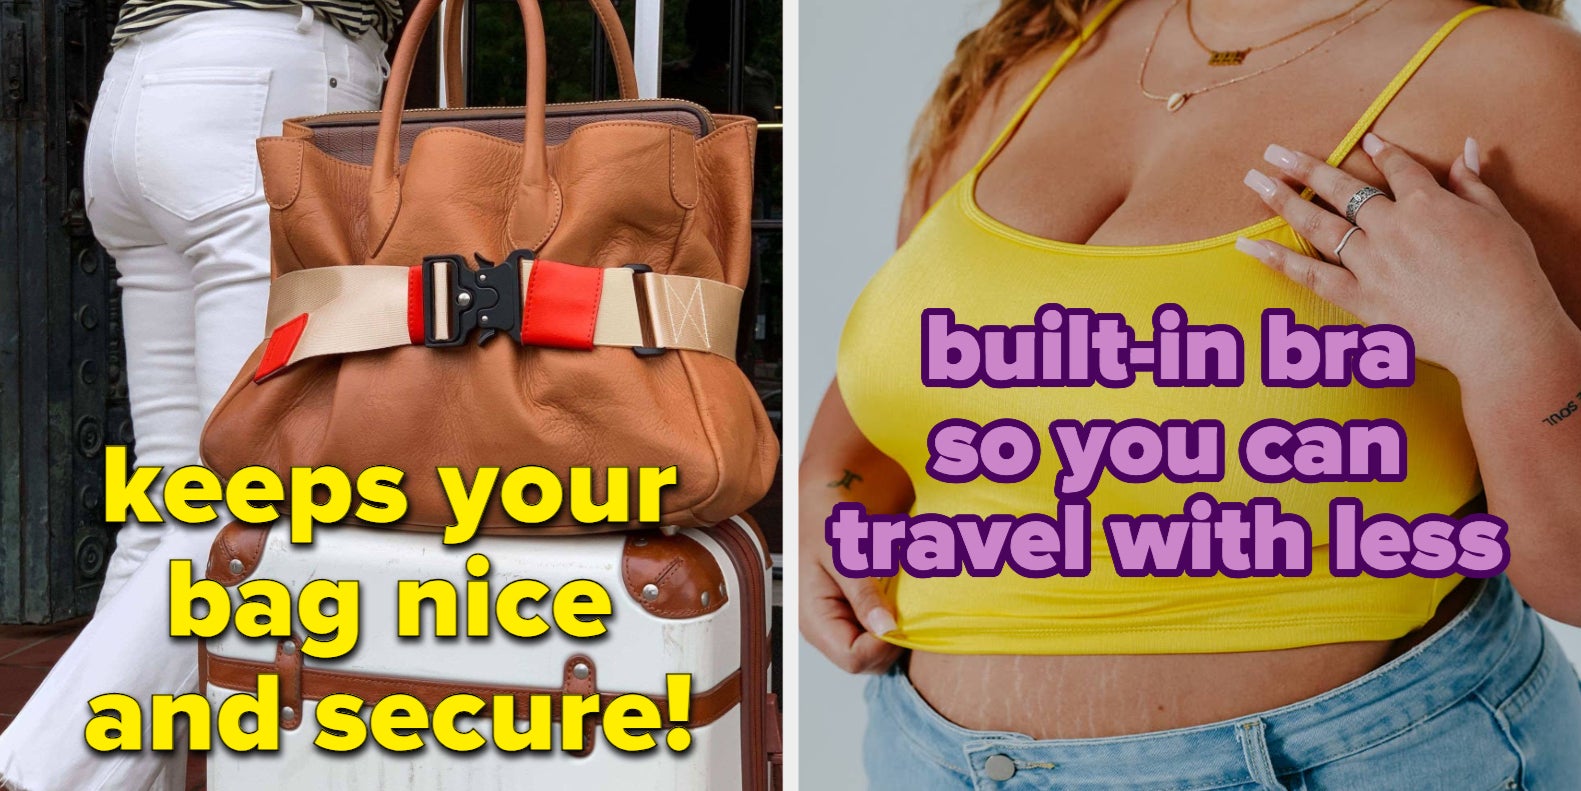 47 Products You'll Want If Travel Is Your Self-Care